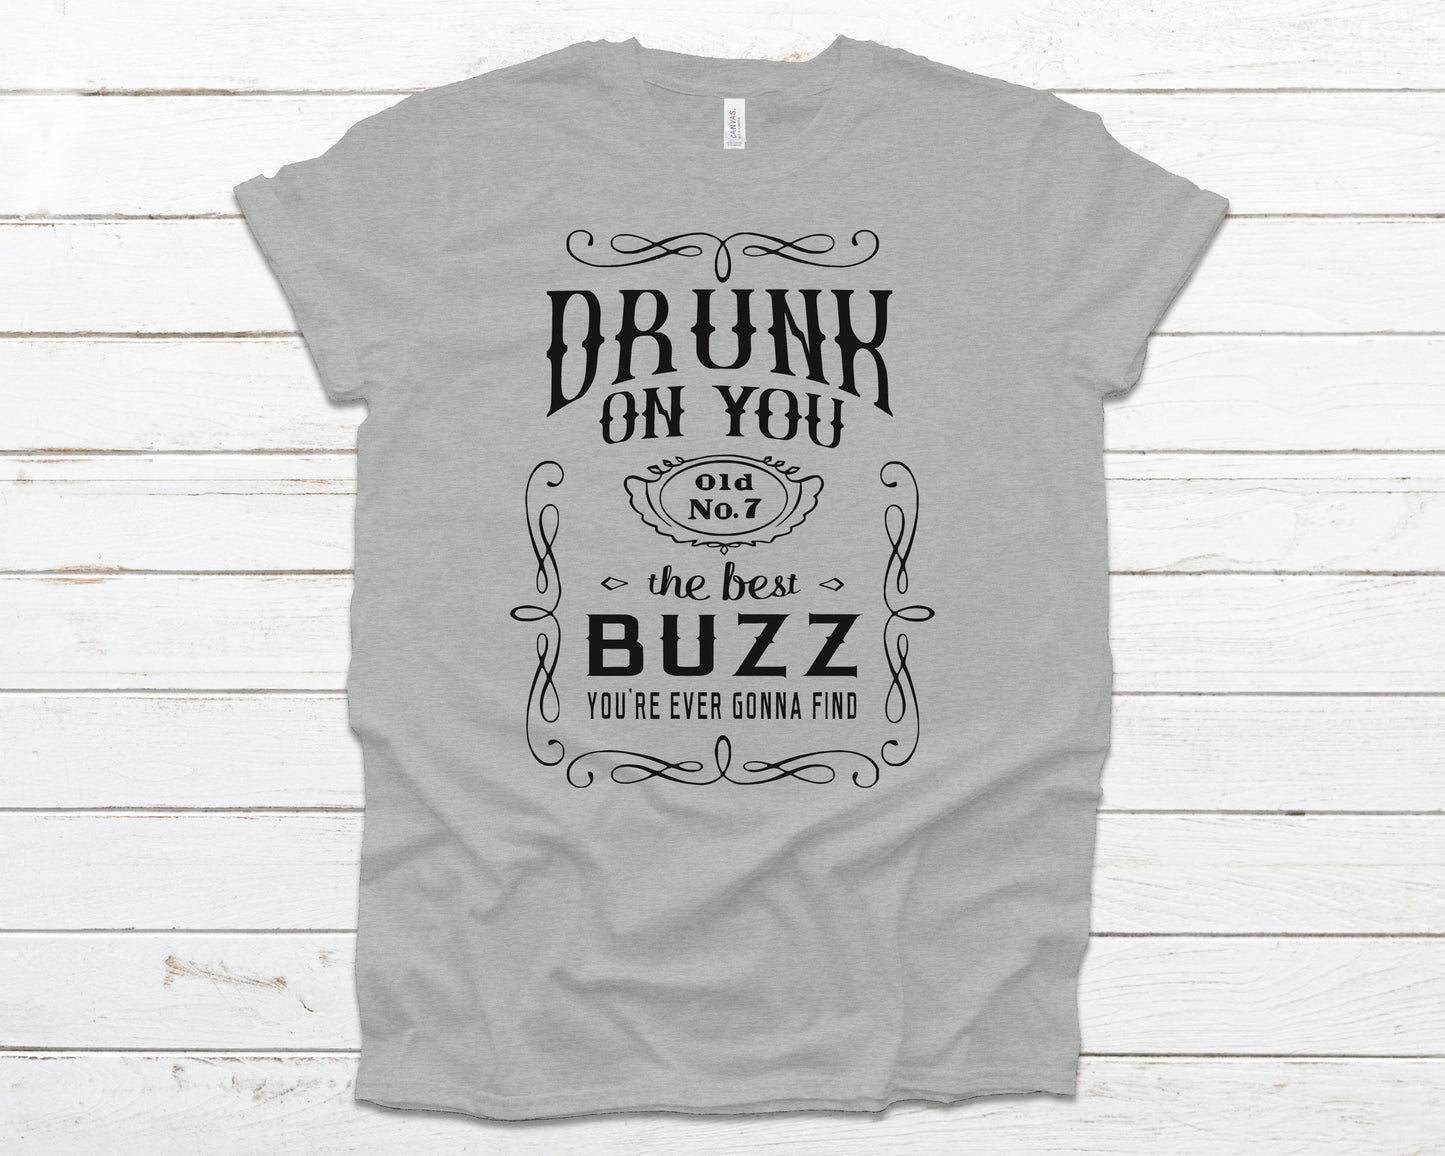 Drunk on you best buzz you're ever gonna find